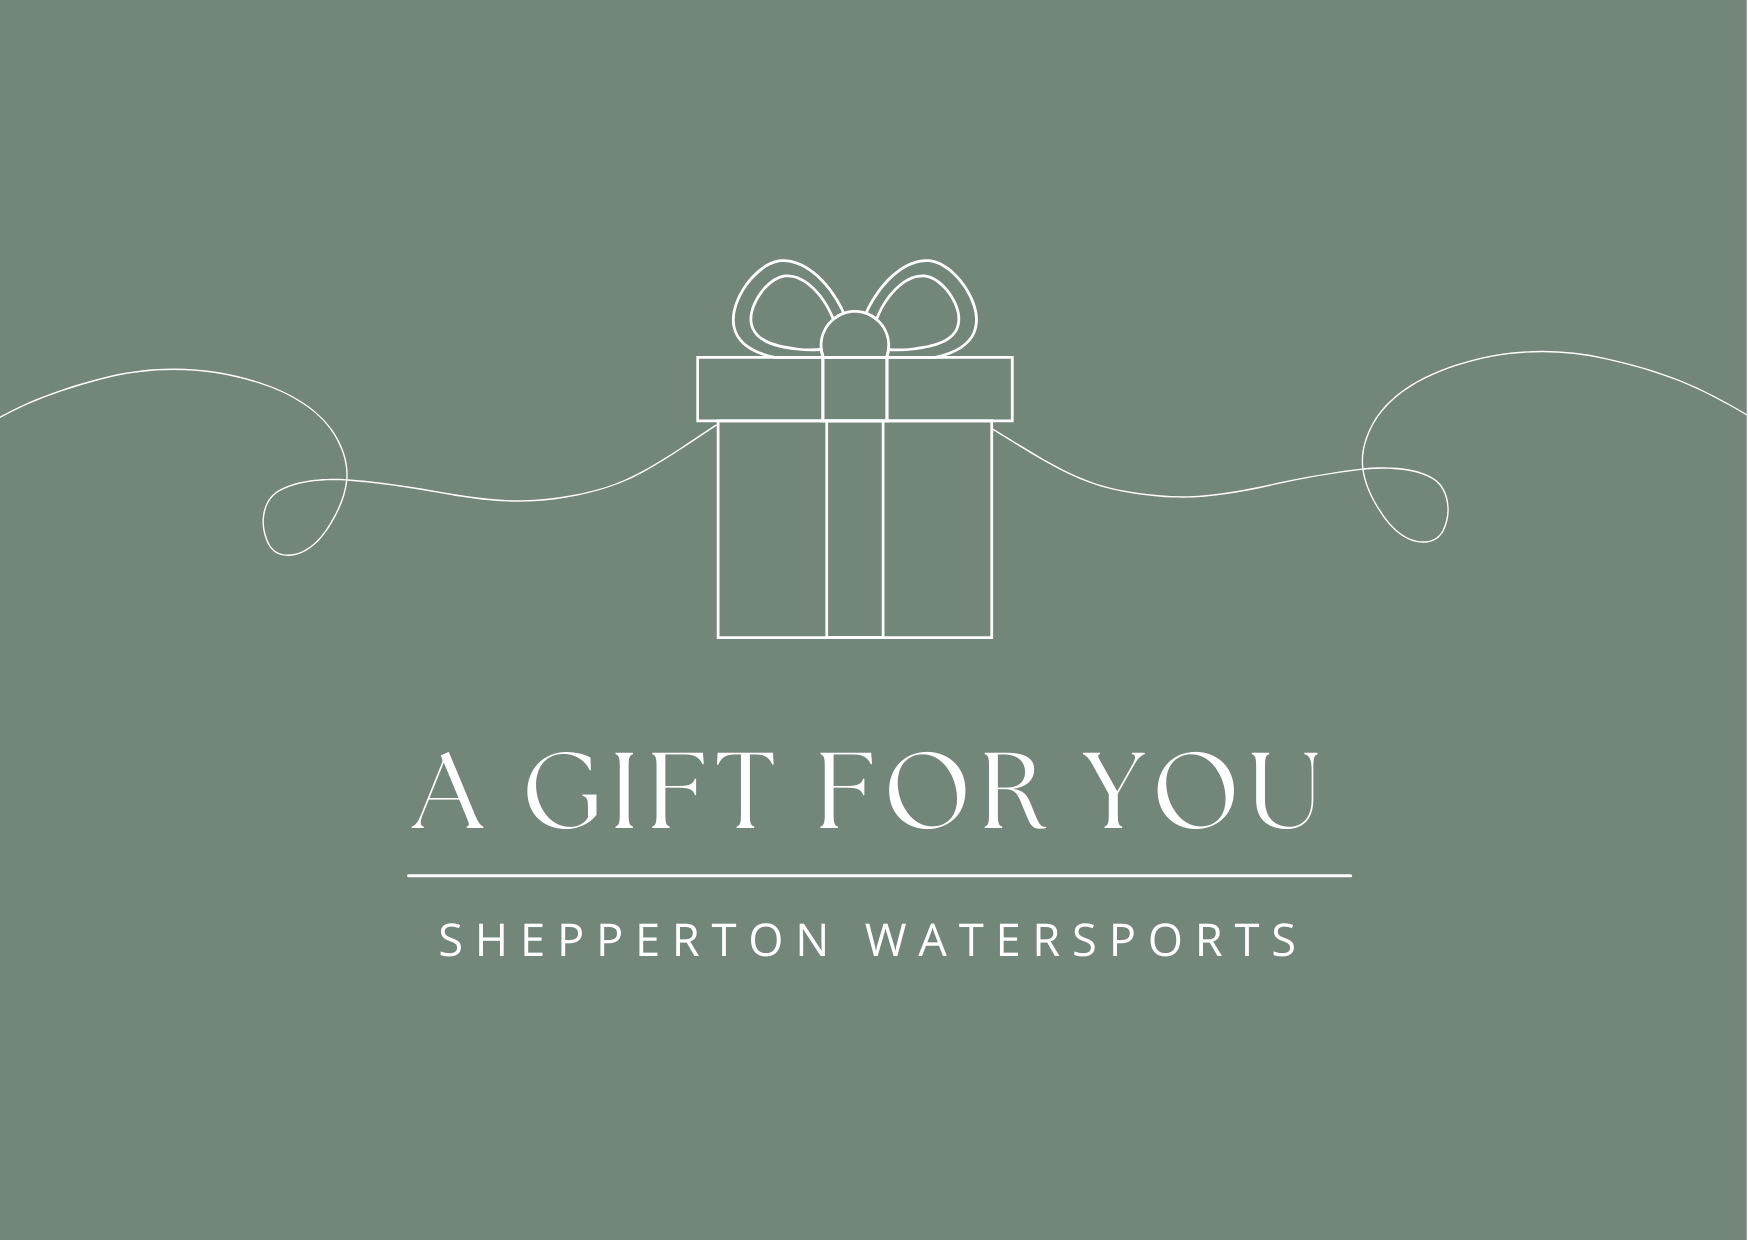 Shepperton Watersports Gift Card